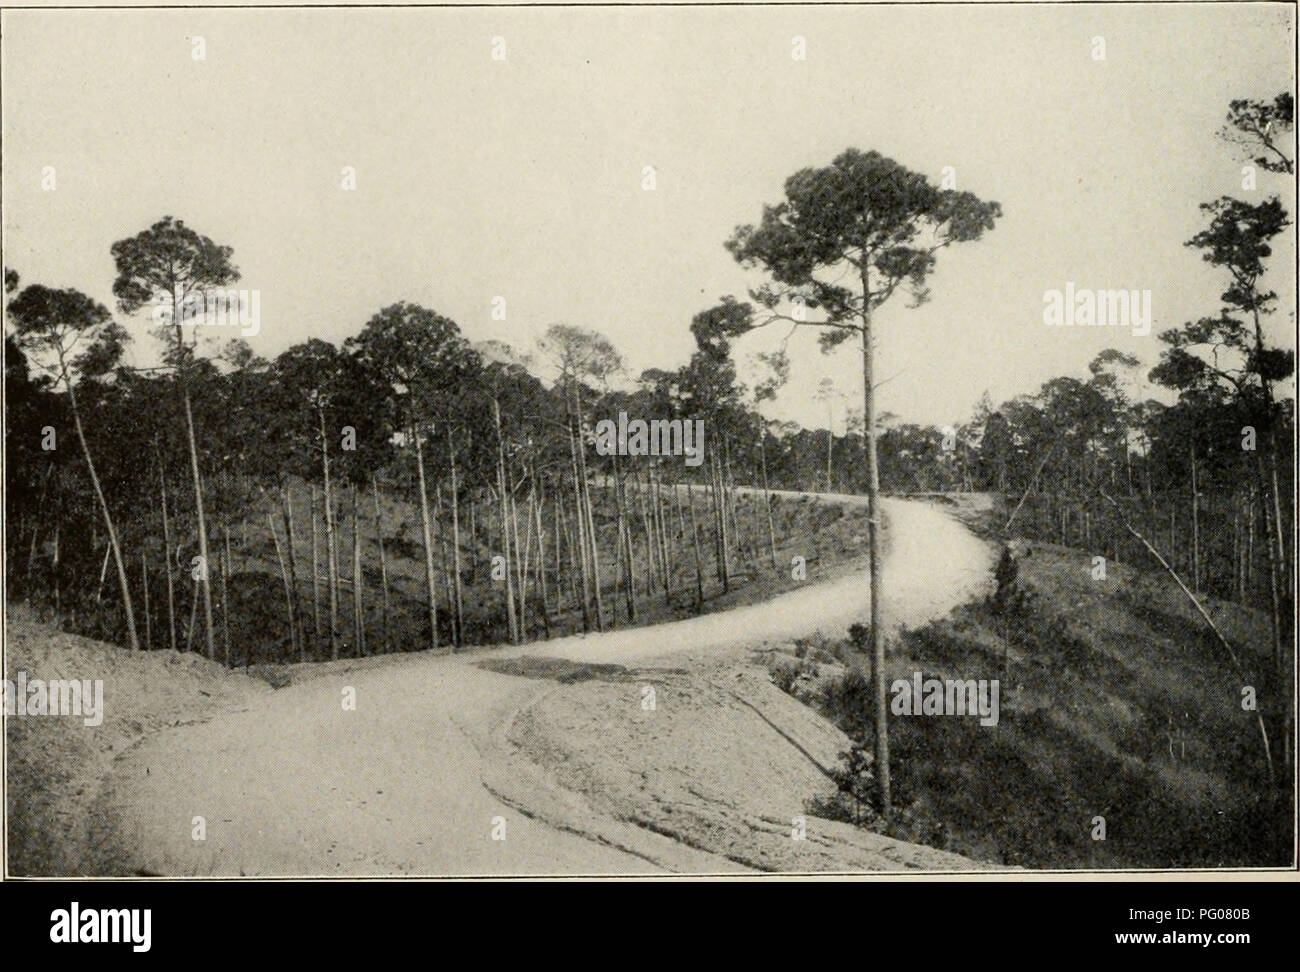 . The Cuba review. Cuba -- Periodicals. i Canetera de Guane a Luis Lazo, Oct., 1908. Tipico camino vieje, cerca del Rio Macurijes. View of a typical old road in Cuba, worn to a depth of two meters. Pinar del Rio Province.. Carretera de vuales a la Esperanza en la cuspide de los Pinares. A typical new road in Cuba constructed by the Department of Public Works. There are already enough fine hard roads completed to make an automobile a necessity and a pleasure for the resident and tourist.. Please note that these images are extracted from scanned page images that may have been digitally enhanced  Stock Photo